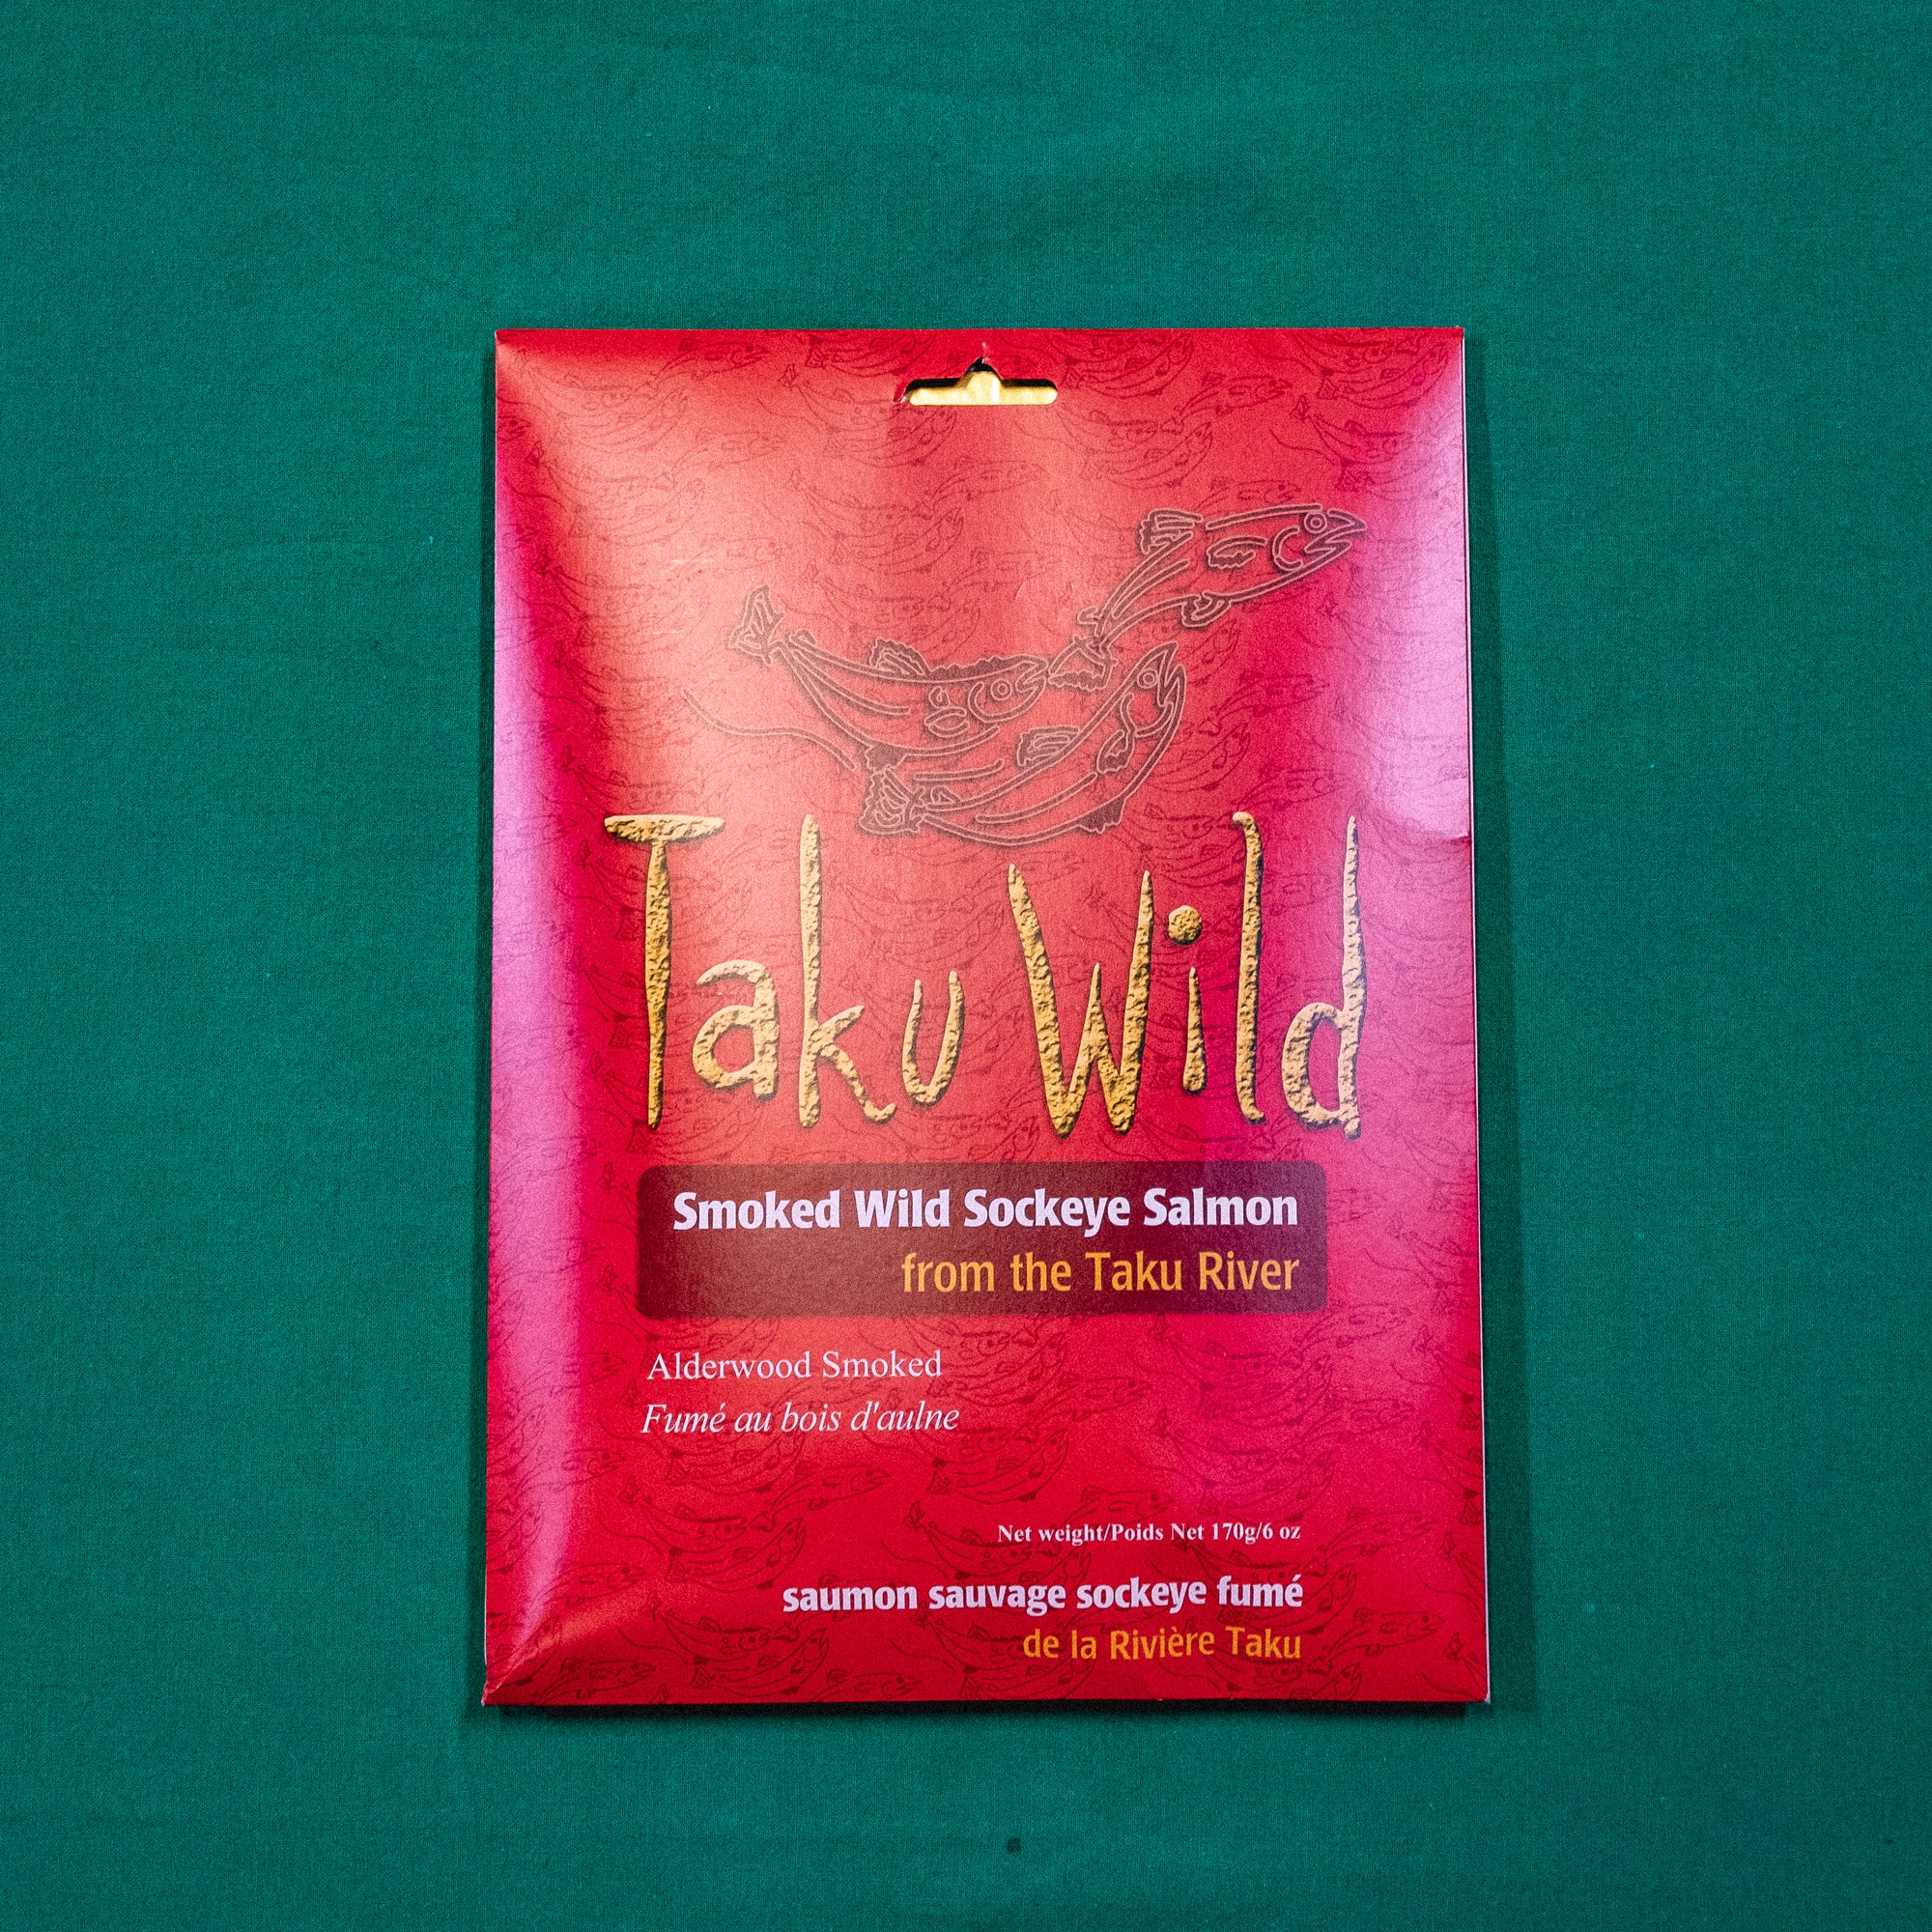 A packet with illustrations of salmon. Text on the image says "Taku Wild. Smoked Wild Sockeye Salmon from the Take River. Alderwood Smoked." End of image description.